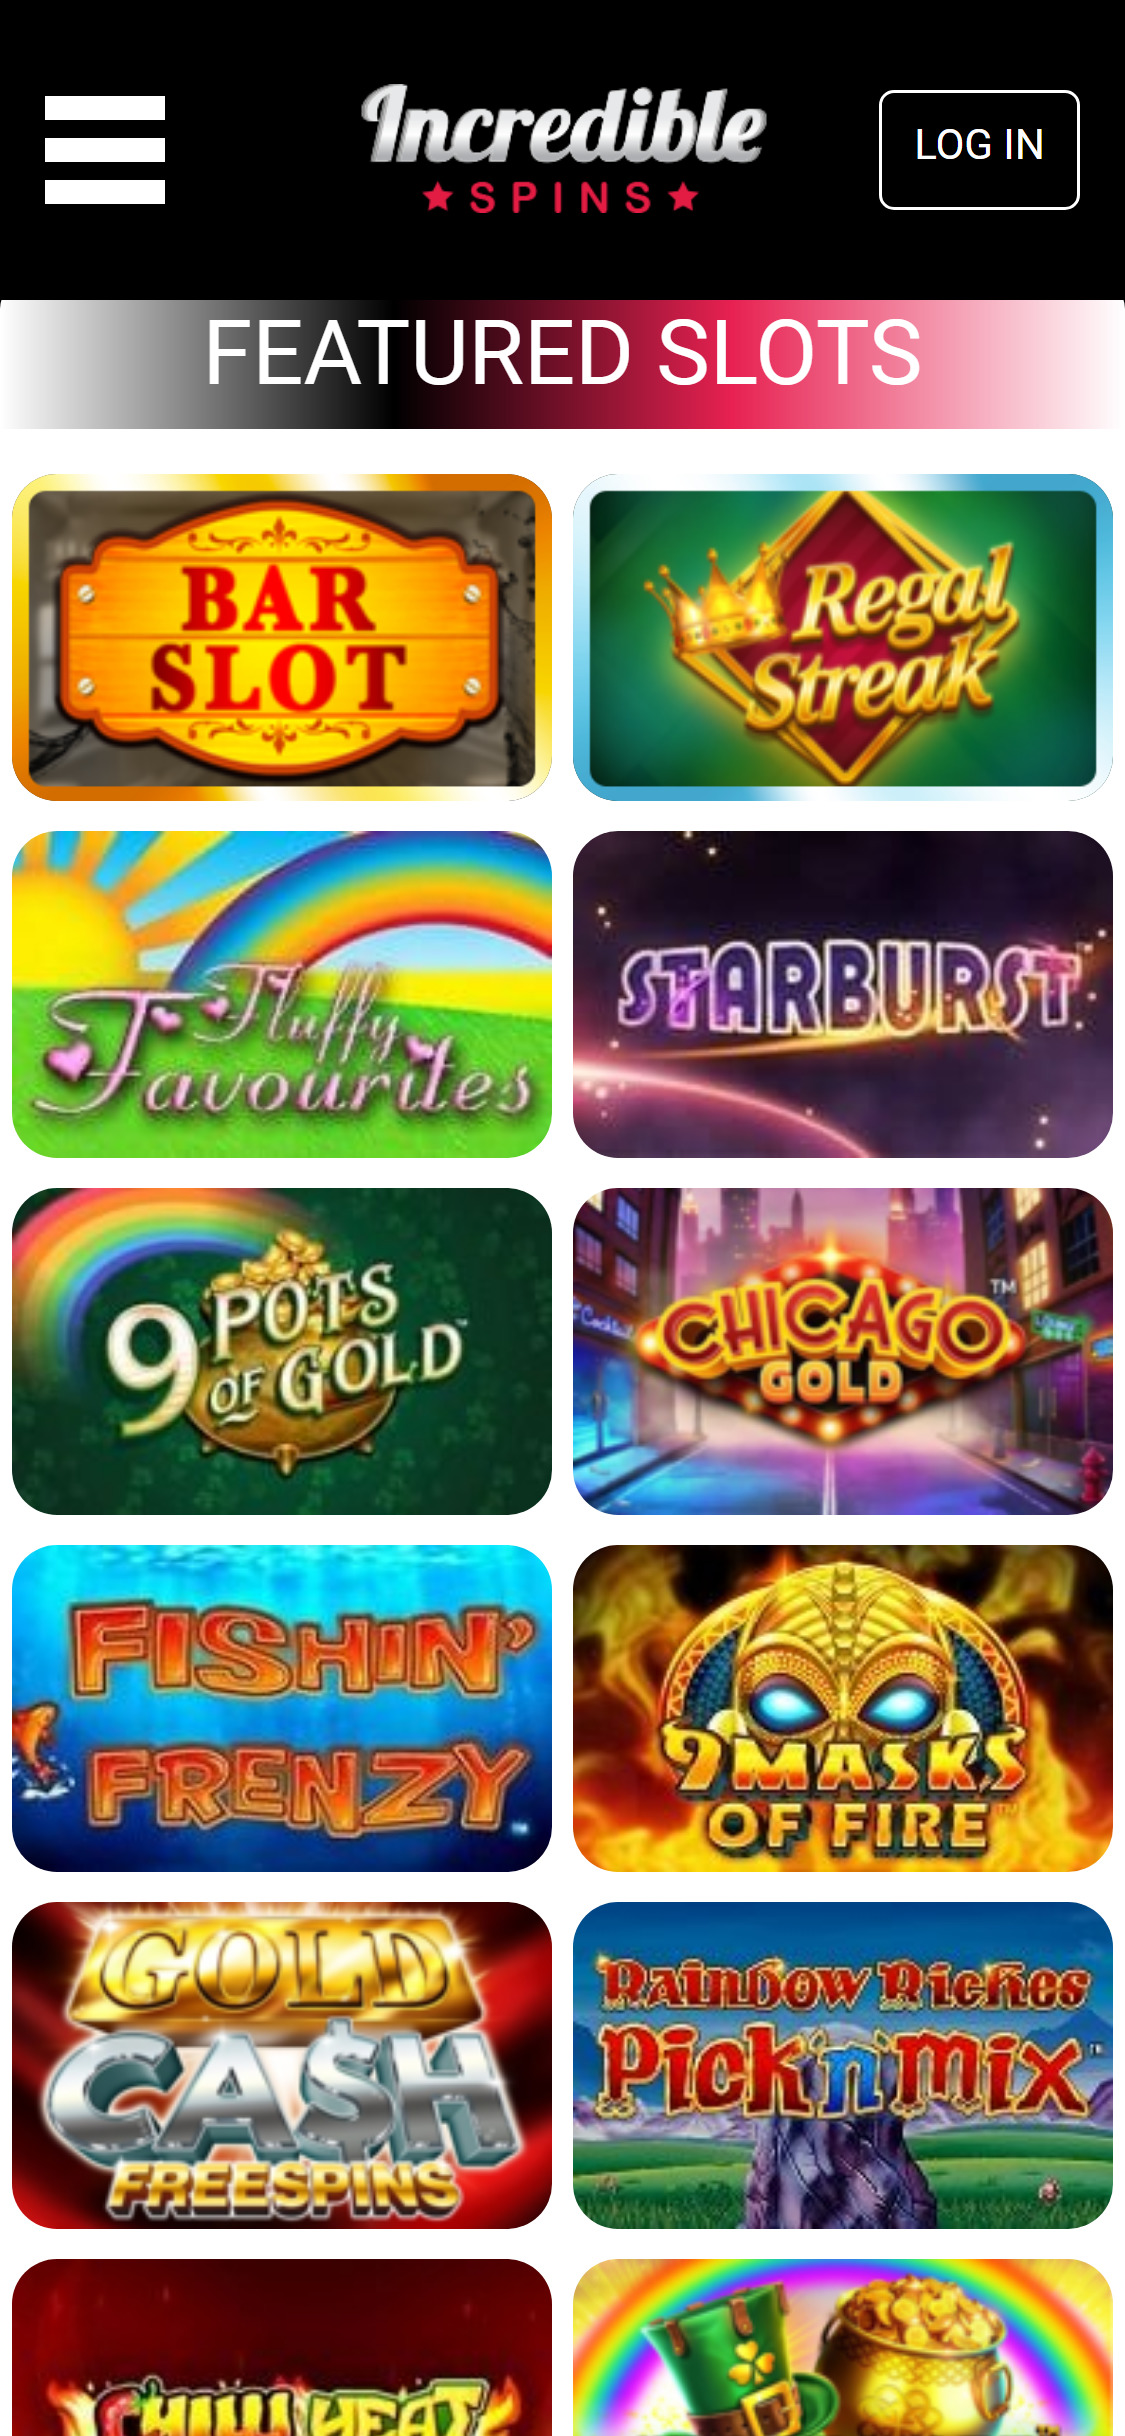 Incredible Spins Casino Mobile Games Review